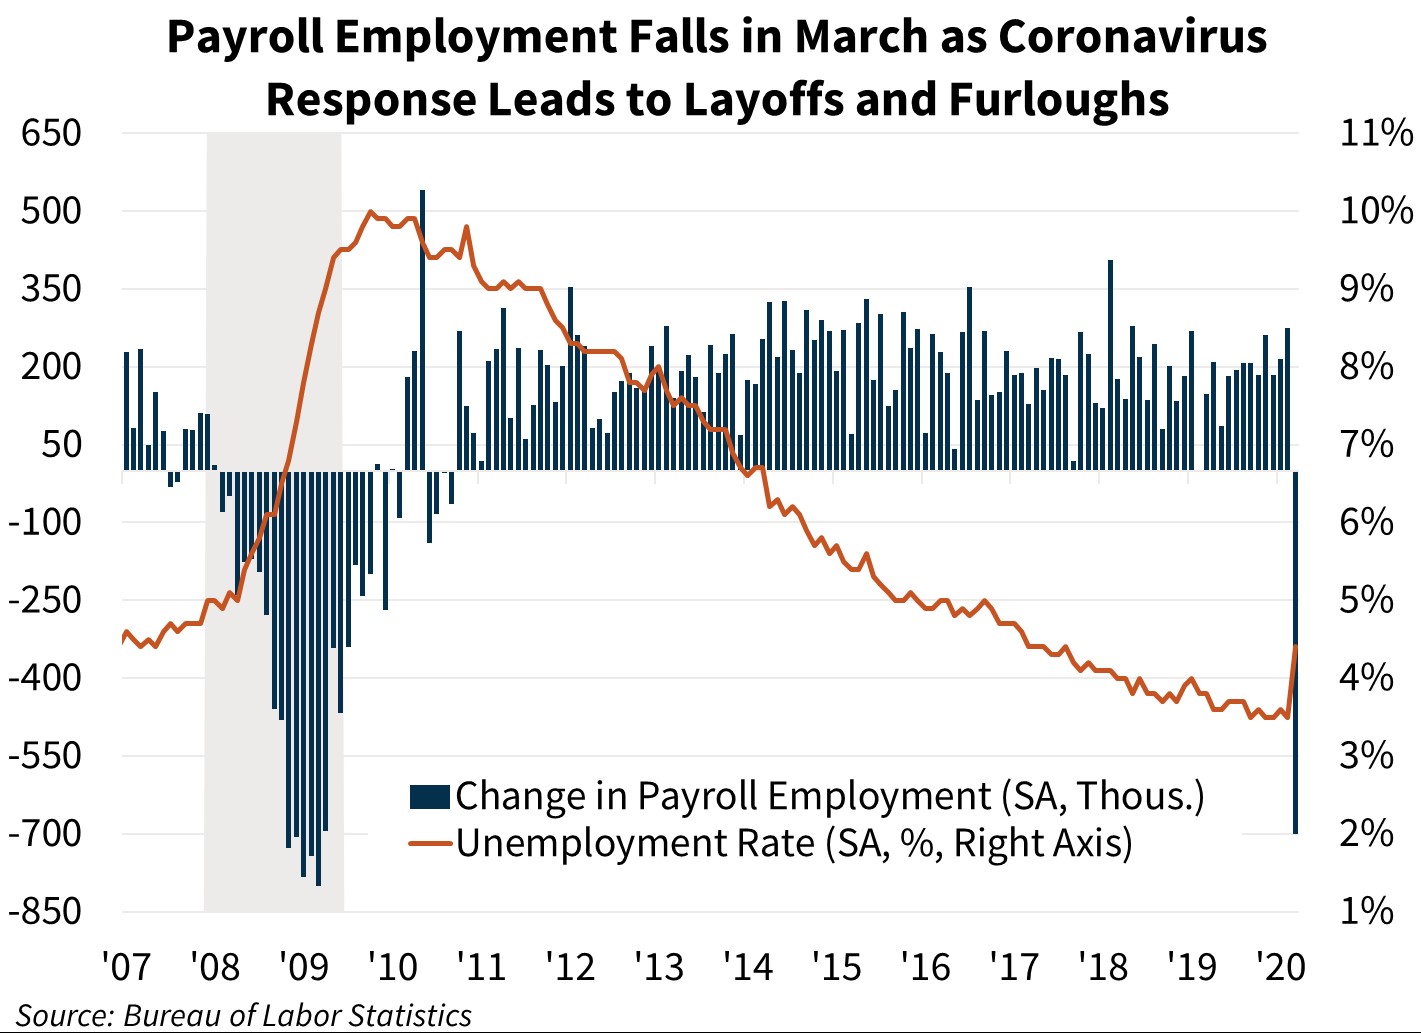 Payroll Employment Falls in March as Coronavirus Response Leads to Layoffs and Furloughs